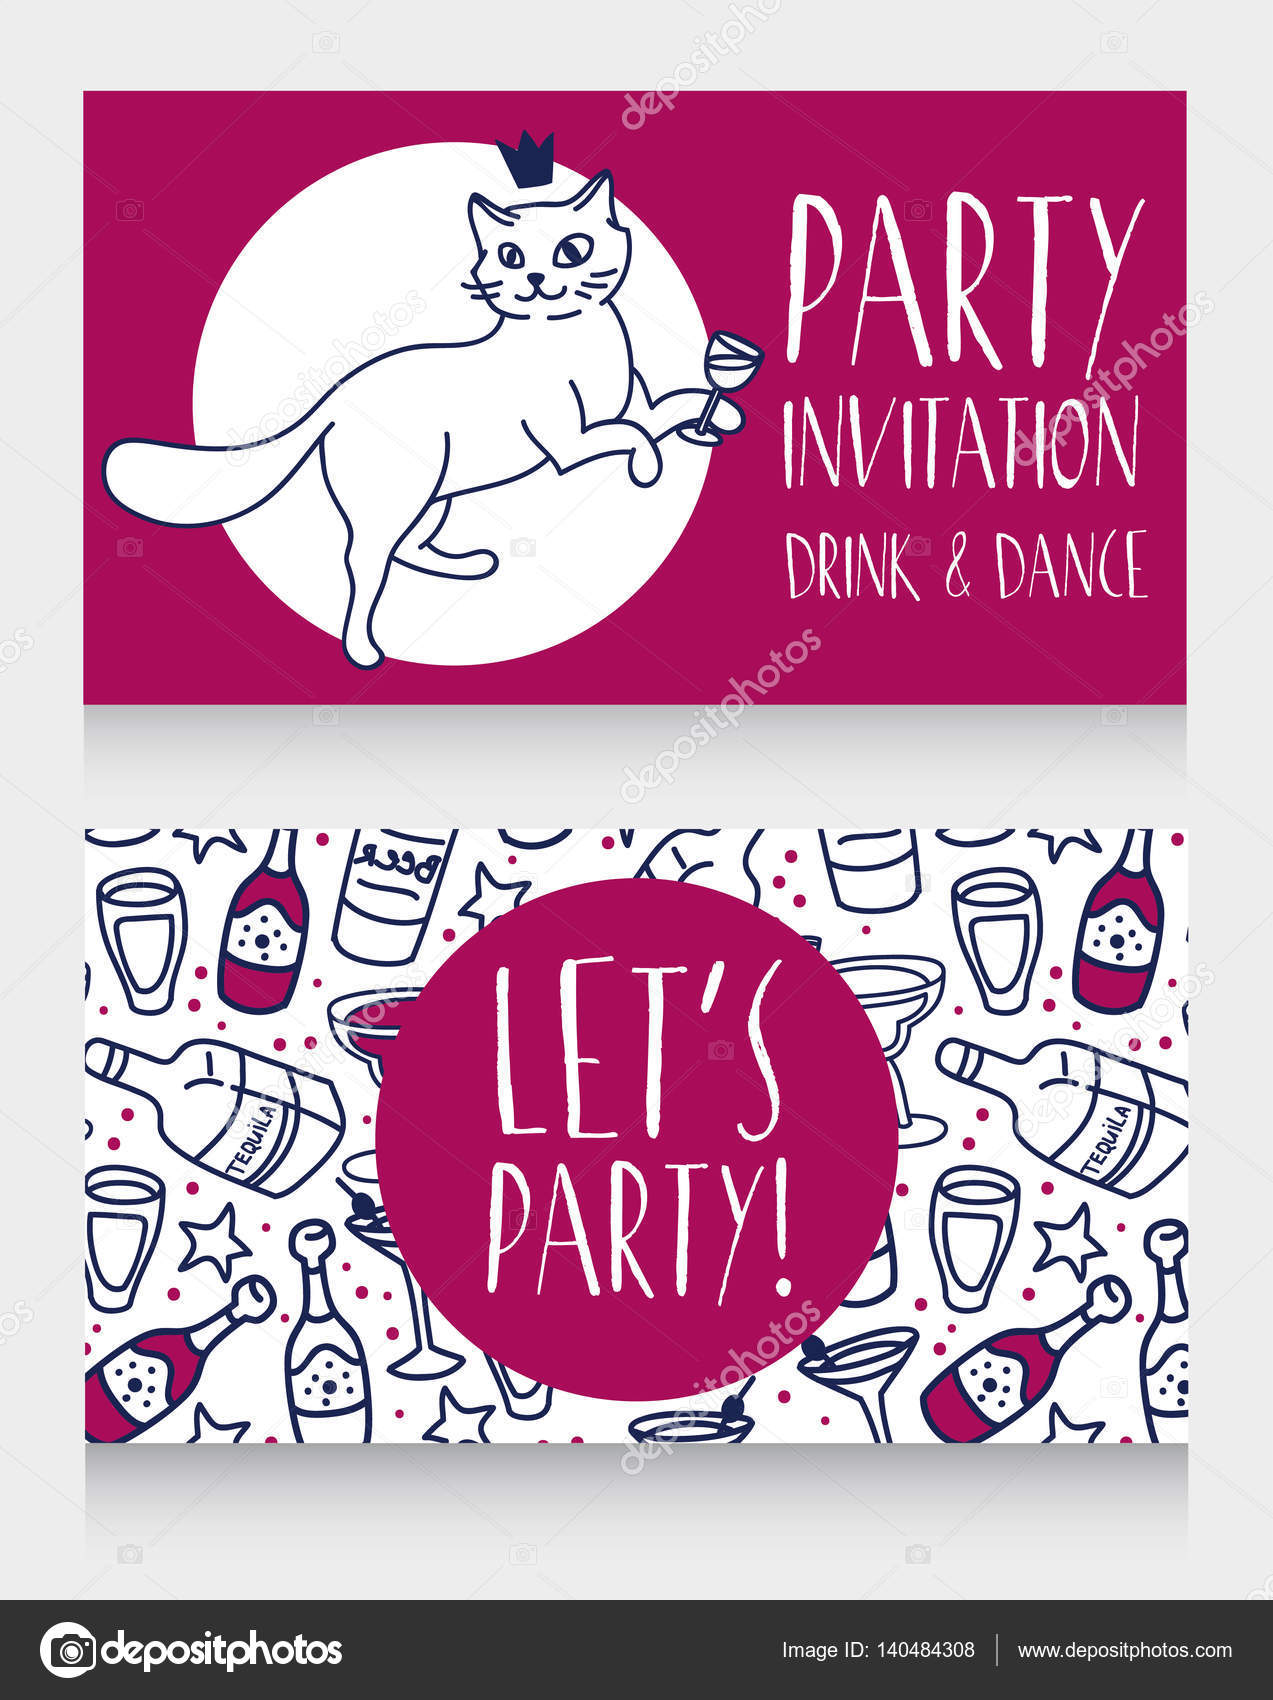 Kitty party invitation Vector Art Stock Images | Depositphotos